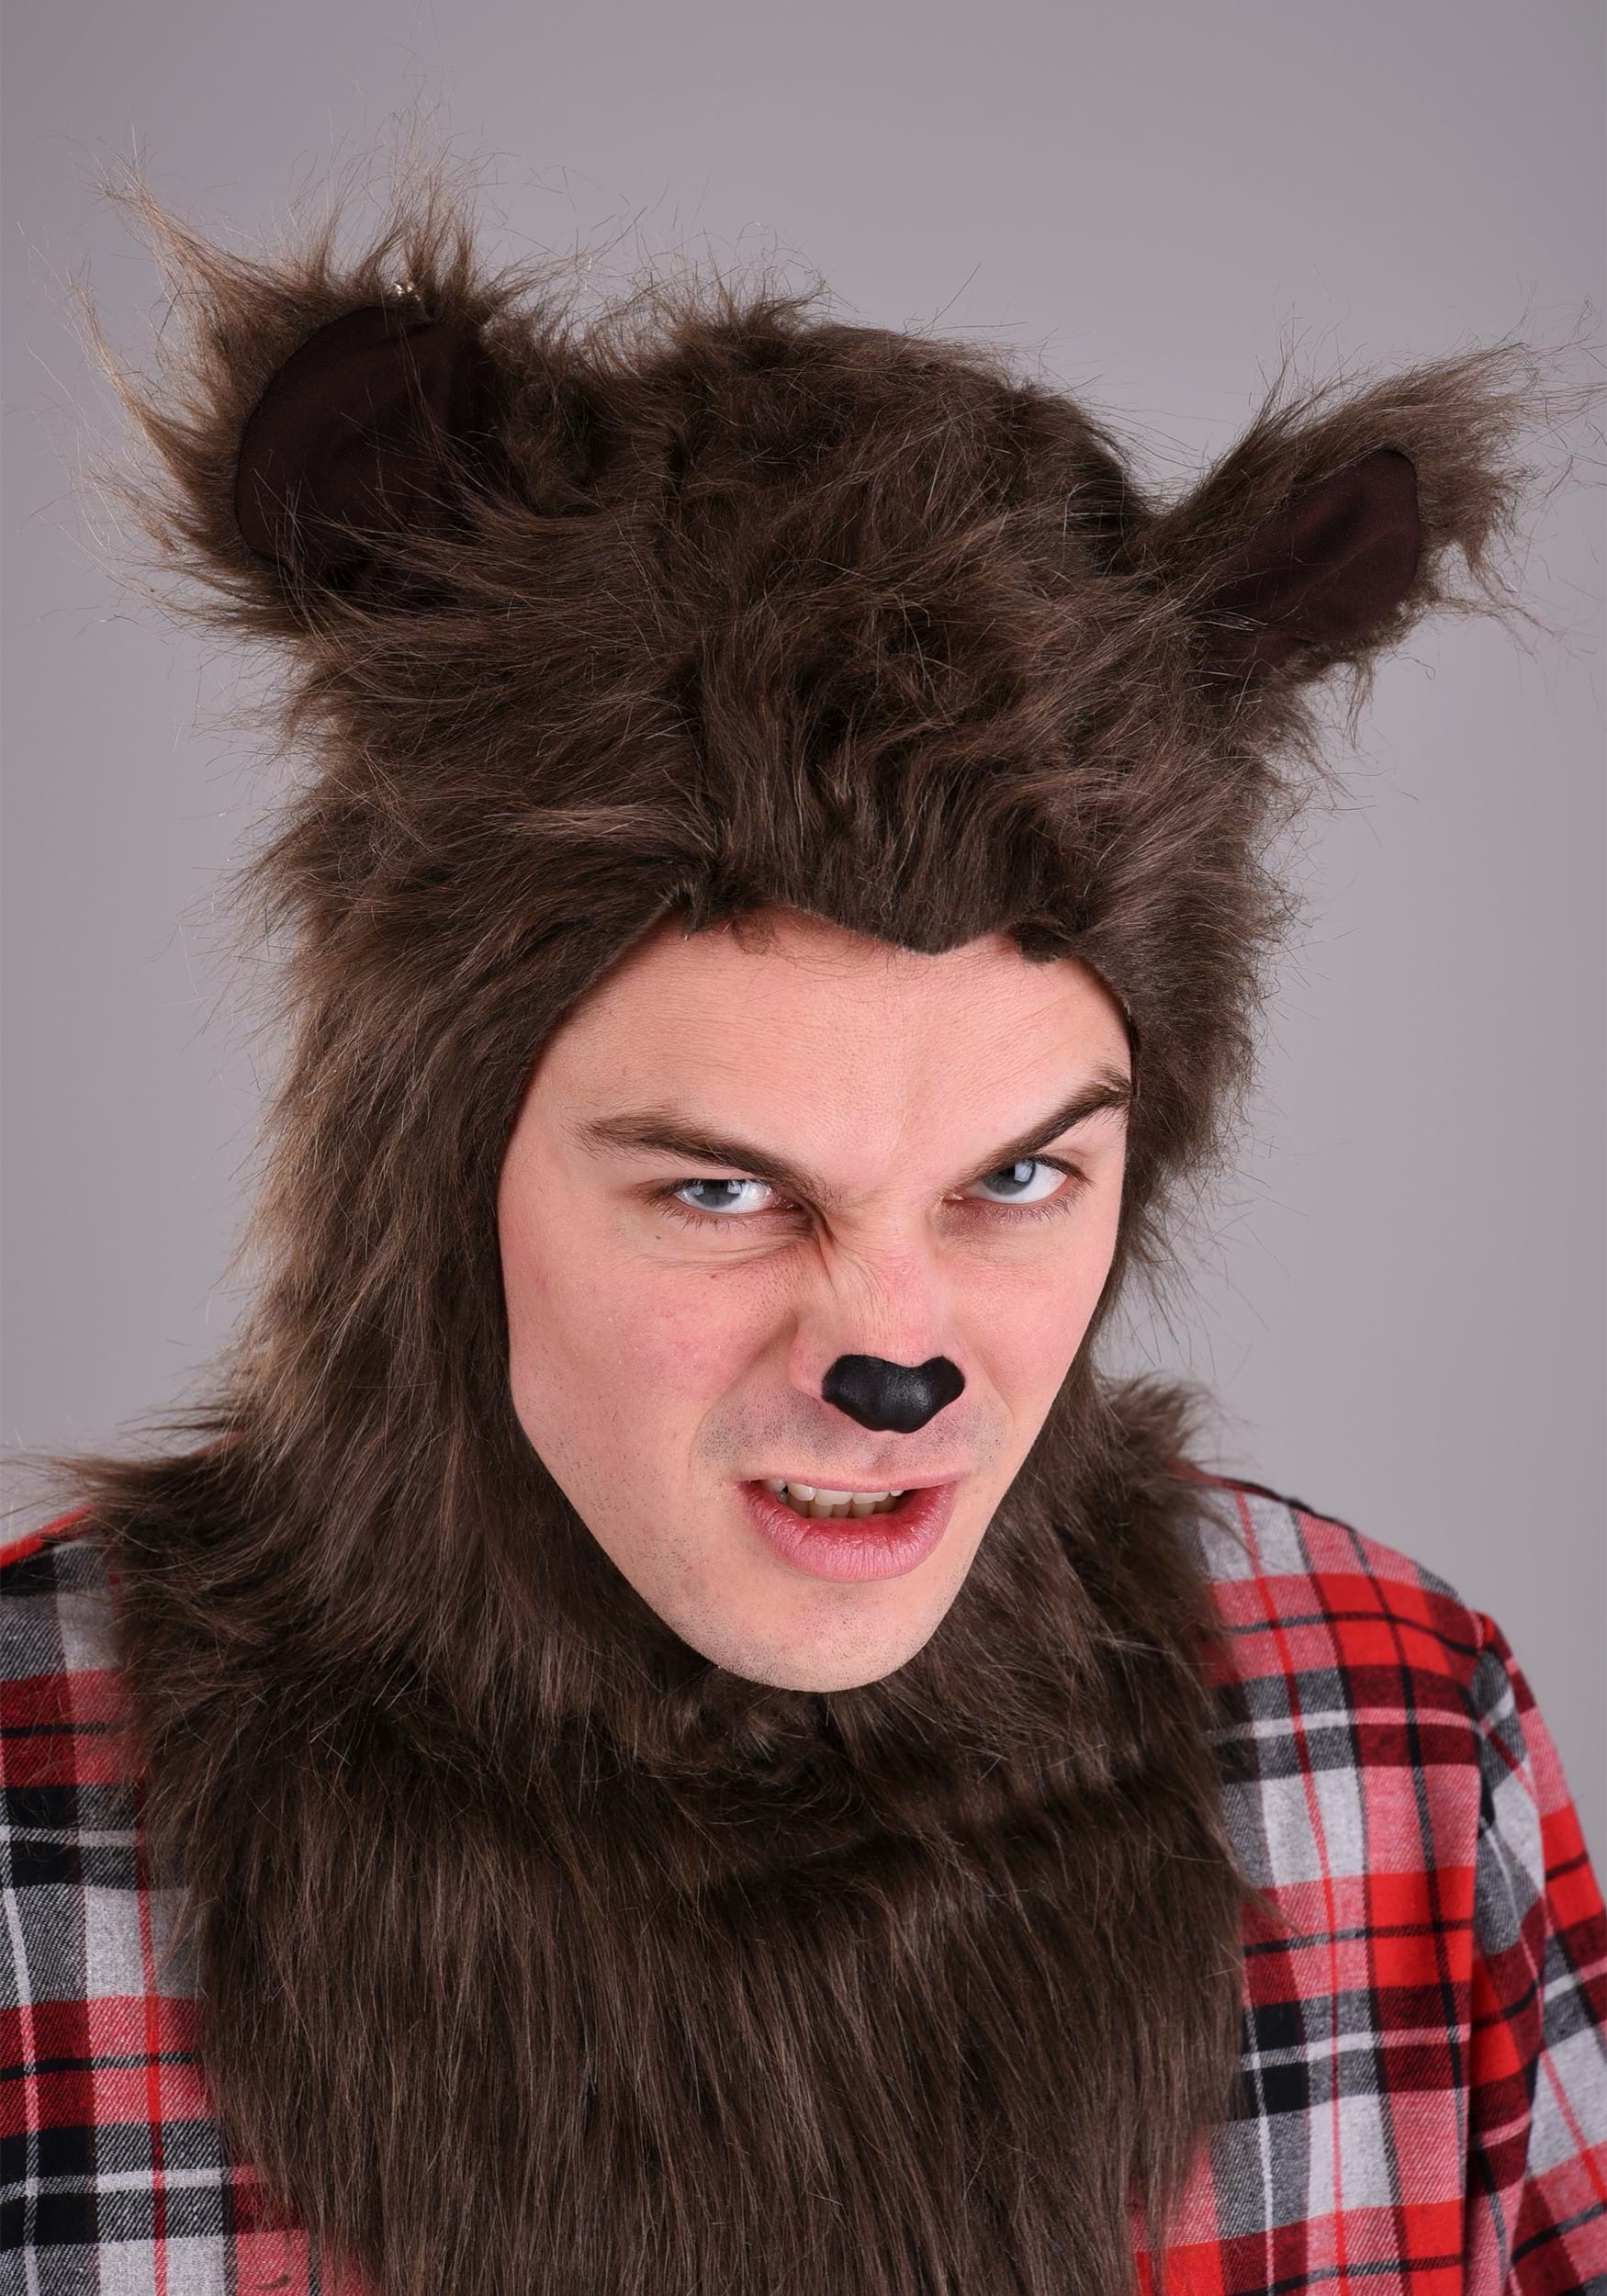 Adult Werewolf Costume , Adult Scary Halloween Costumes